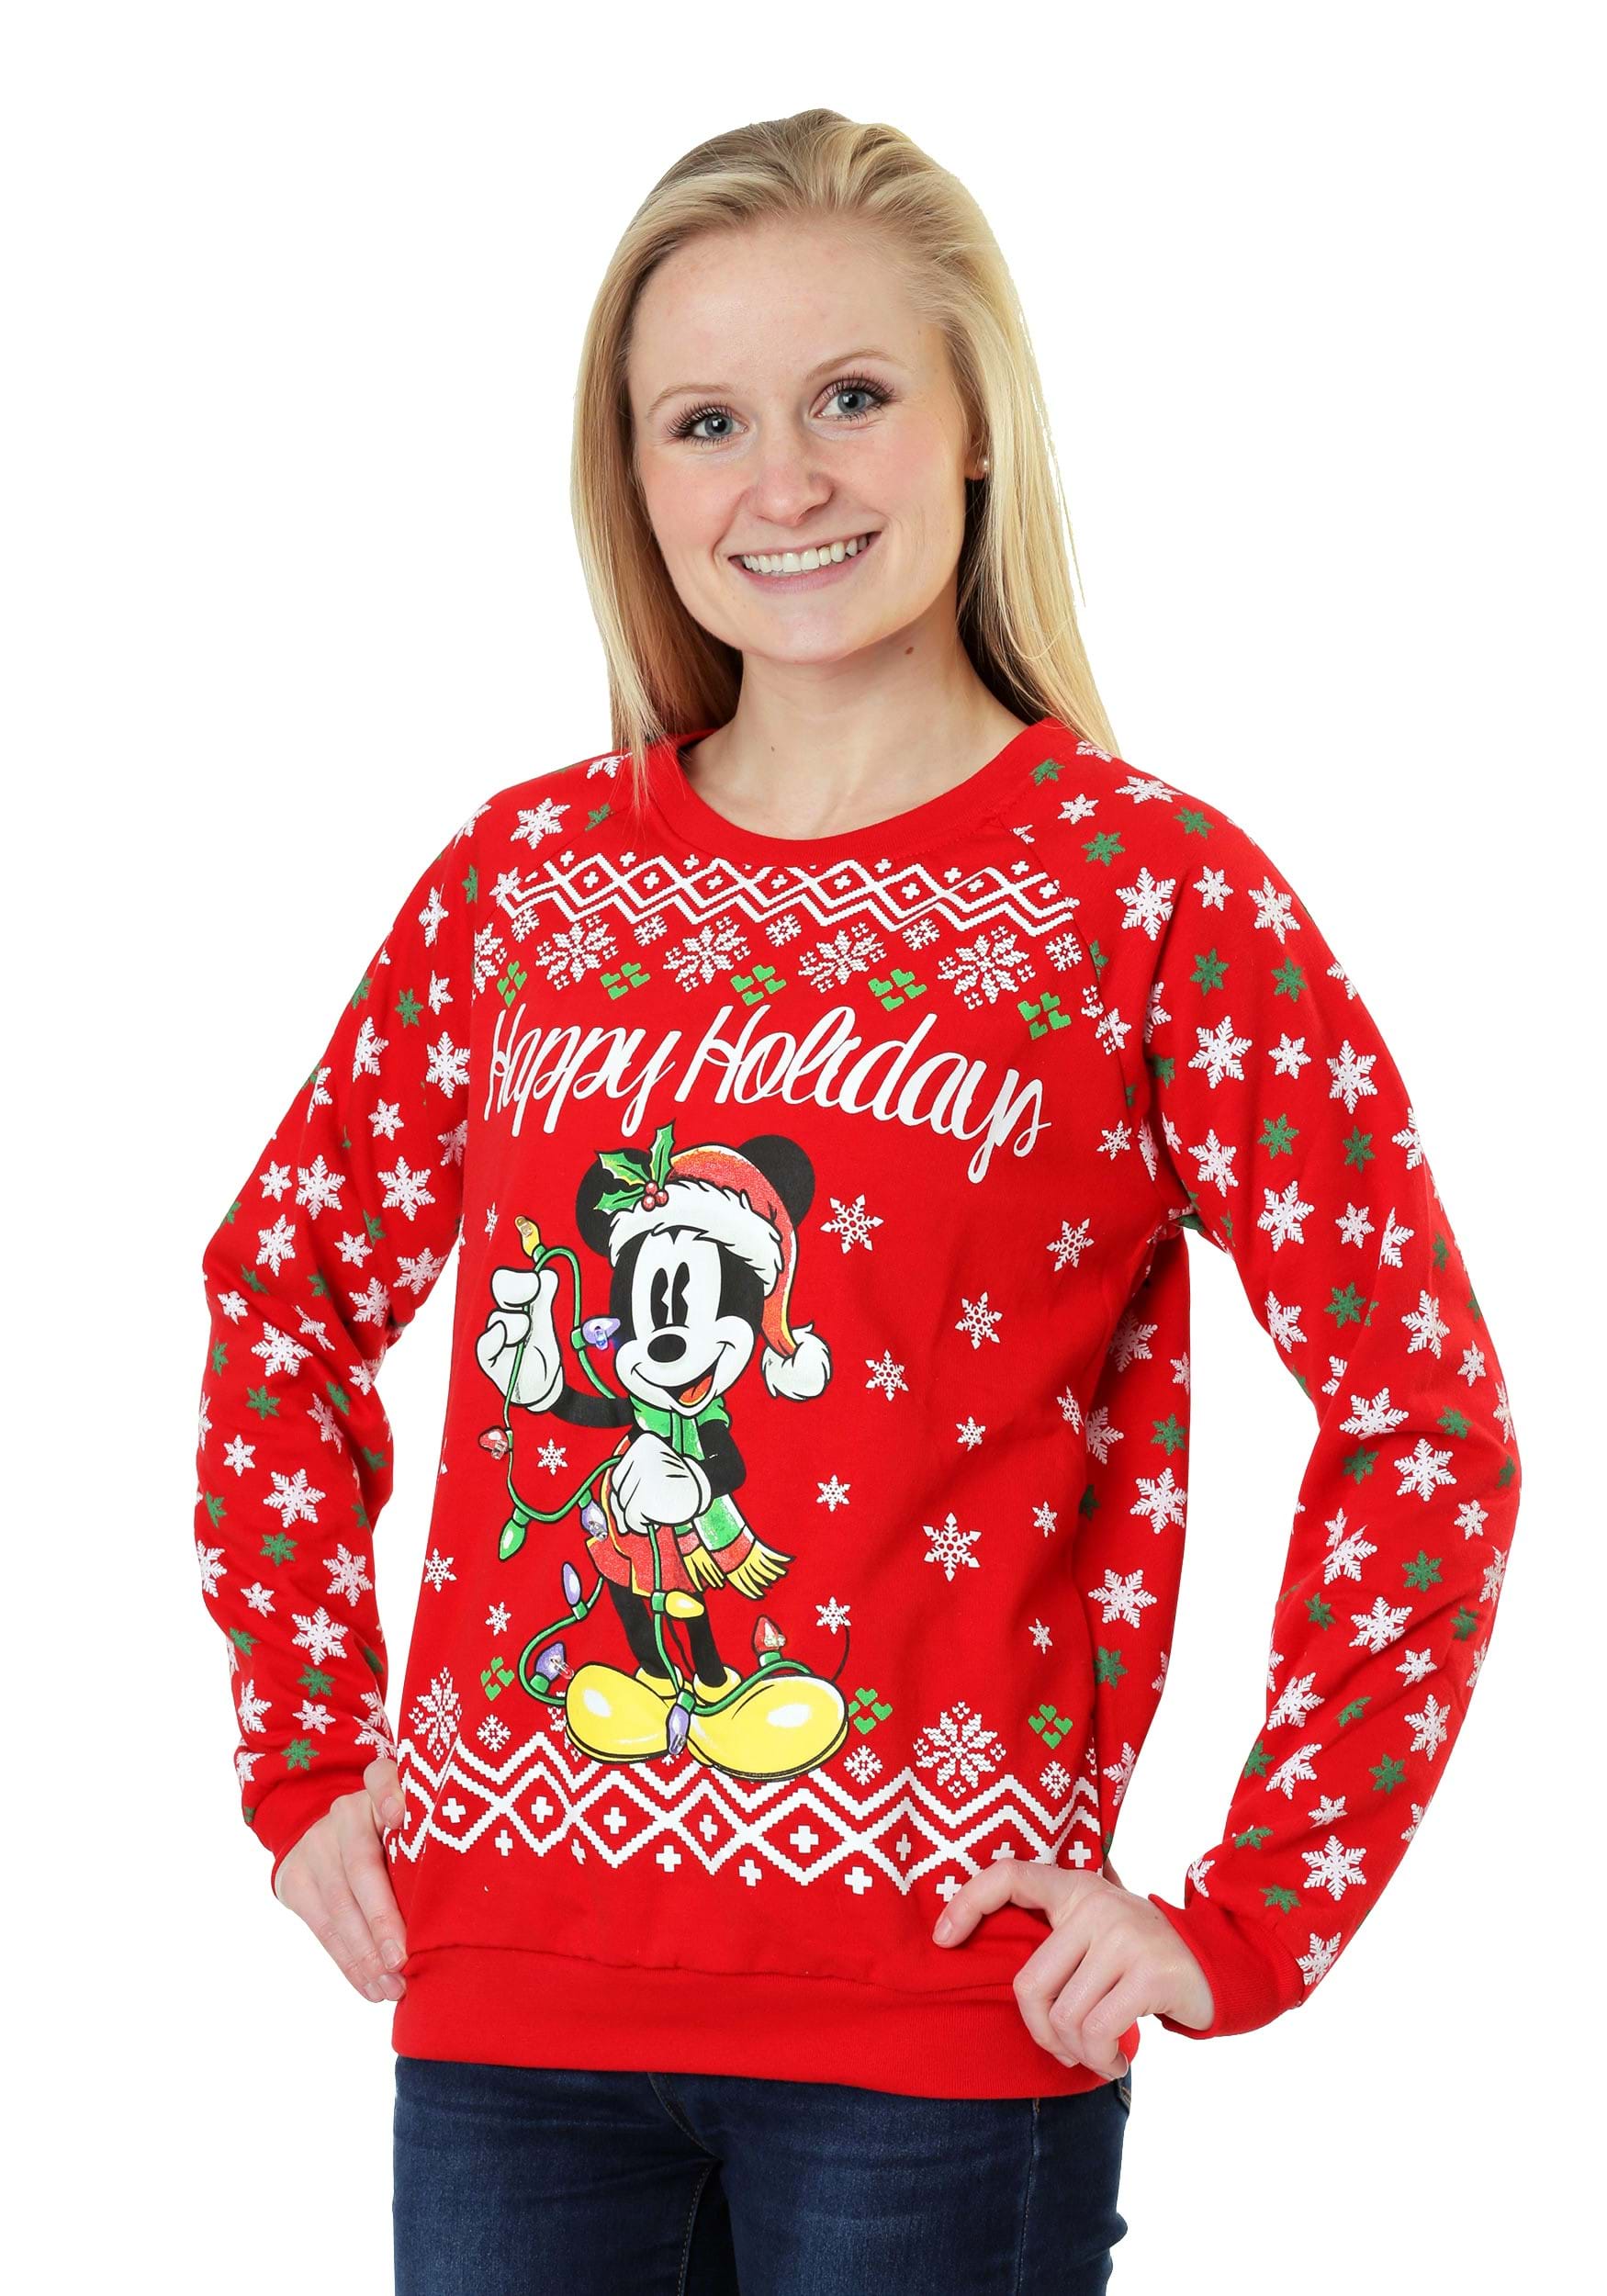 Disney Minnie Mouse Family Holiday Sweater for Women Extended Size Multi